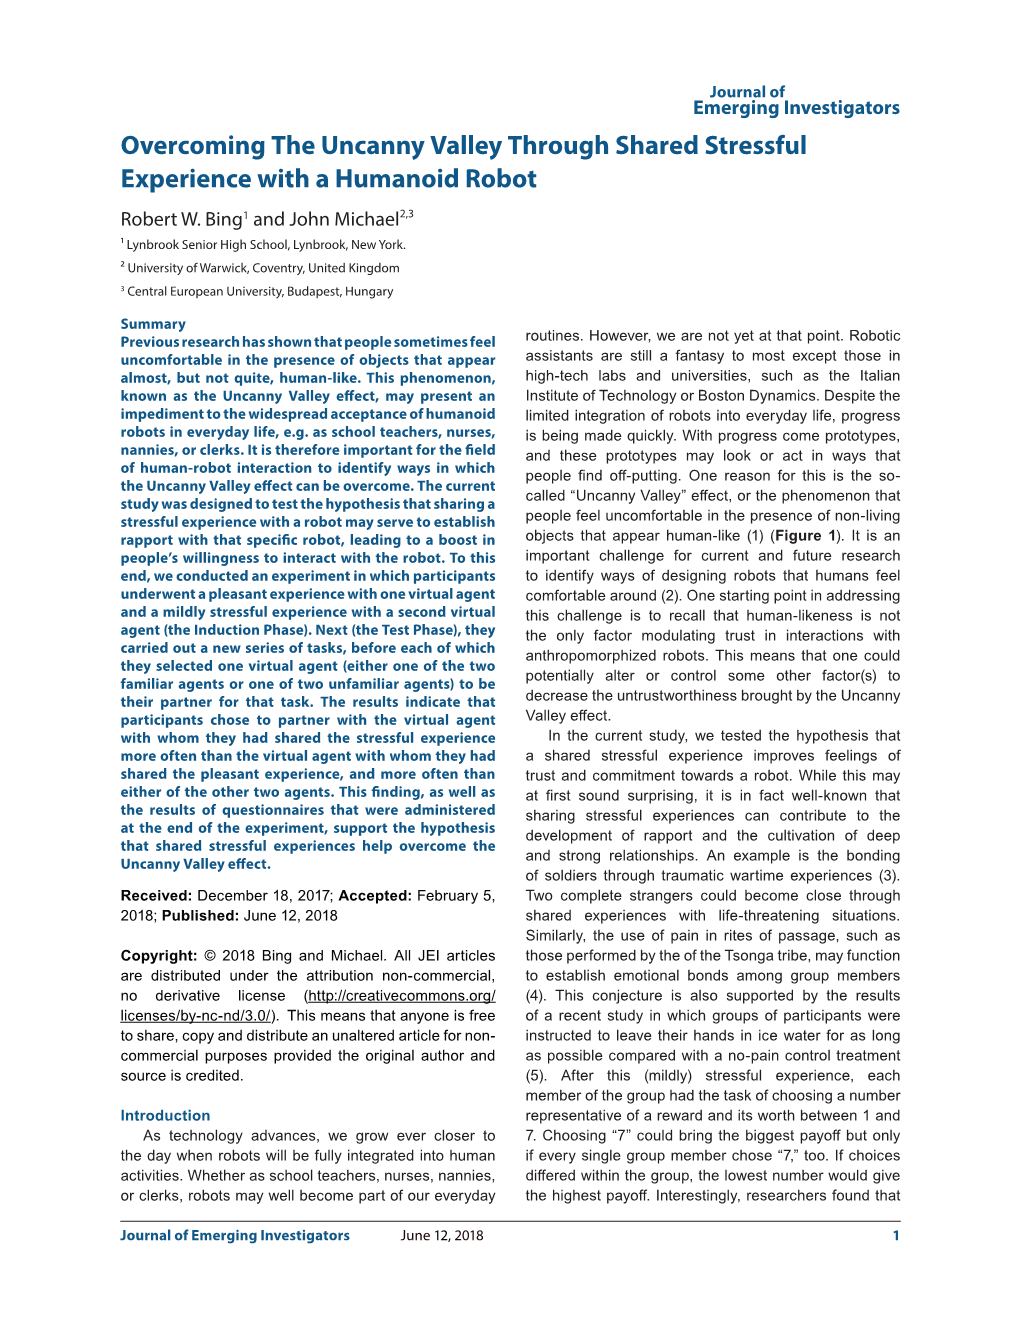 Overcoming the Uncanny Valley Through Shared Stressful Experience with a Humanoid Robot Robert W